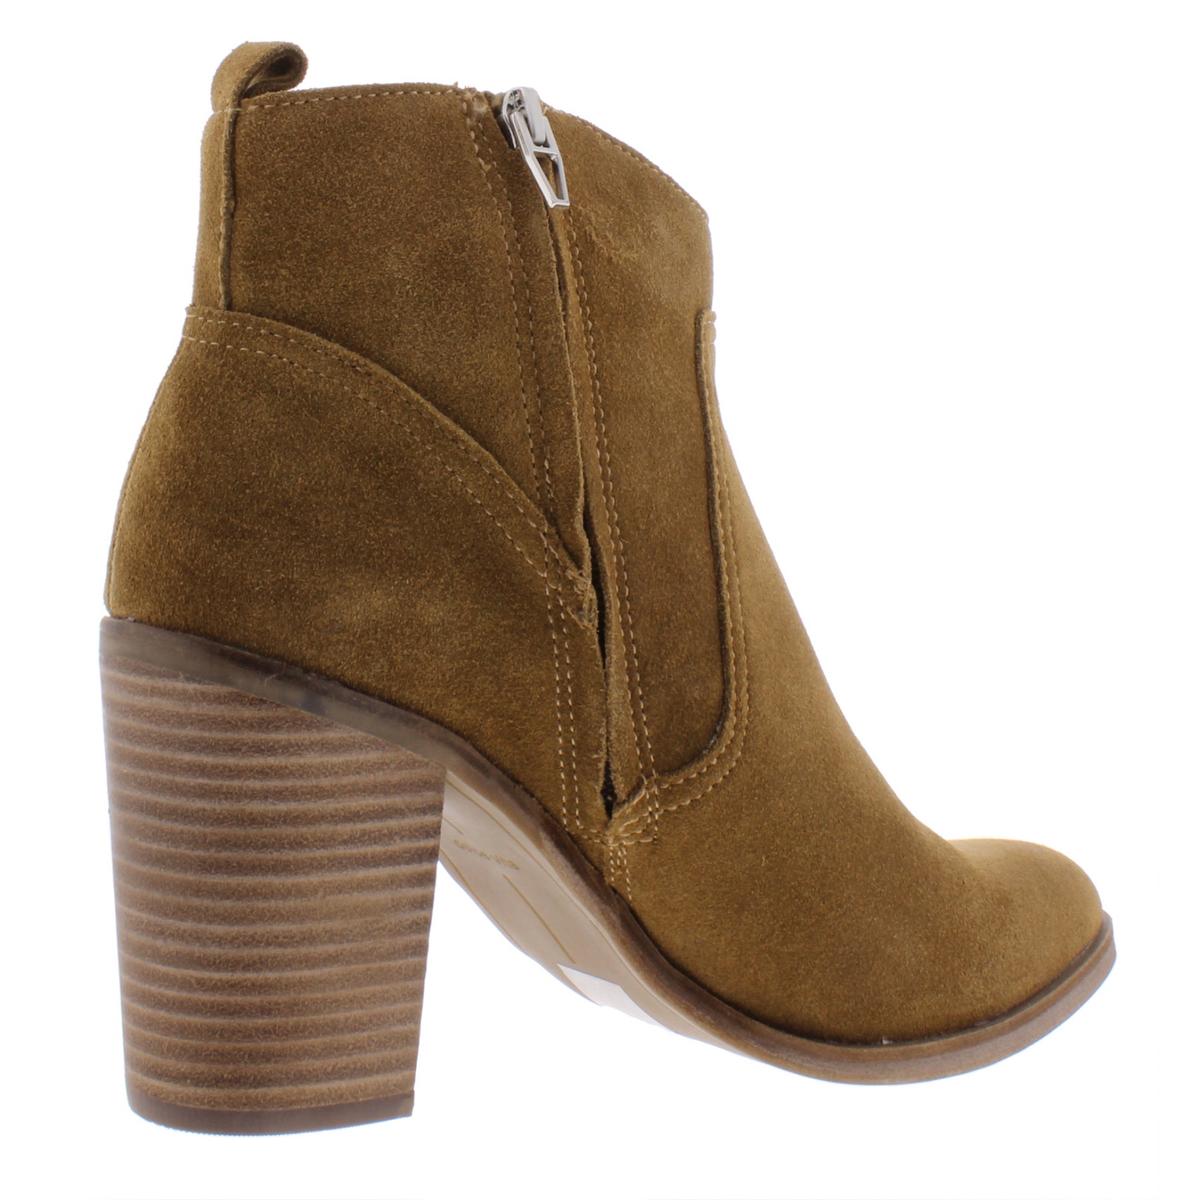 Dolce Vita Womens Saint Suede Ankle Stacked Booties Shoes BHFO 0142 | eBay